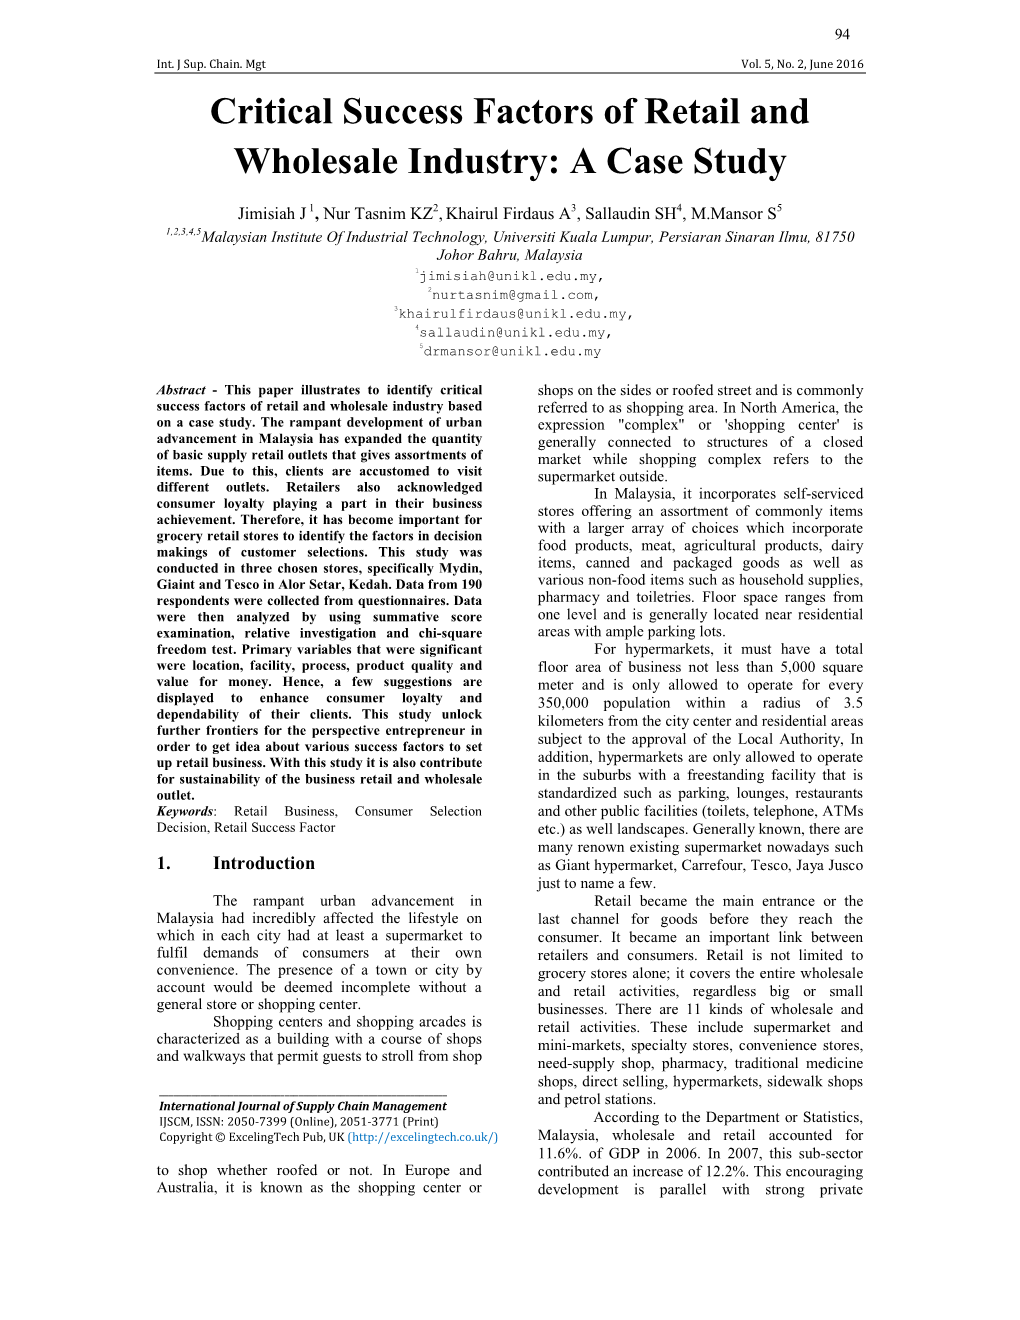 Critical Success Factors of Retail and Wholesale Industry: a Case Study